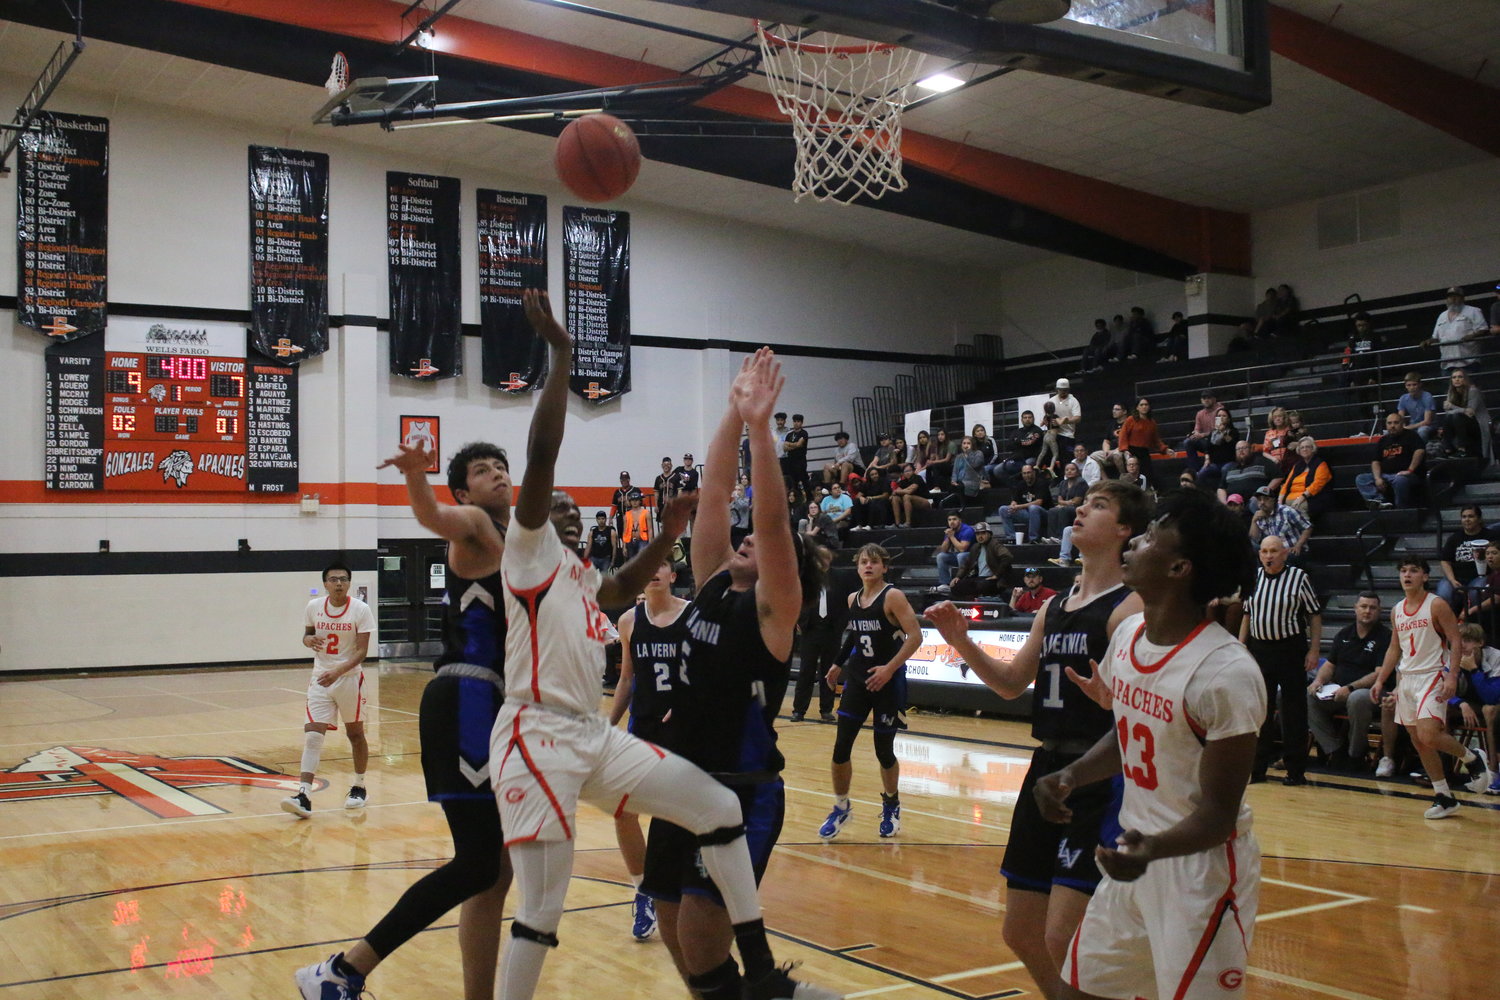 Gonzales’ Jeremiah Hastings gets fouled as he goes up for a shot against La Vernia on Tuesday, Feb. 1. Hastings made the shot and the ensuing free throw to put the Apaches up, 12-7. Gonzales would win the game, 63-57, to get payback against the Bears for an earlier loss.